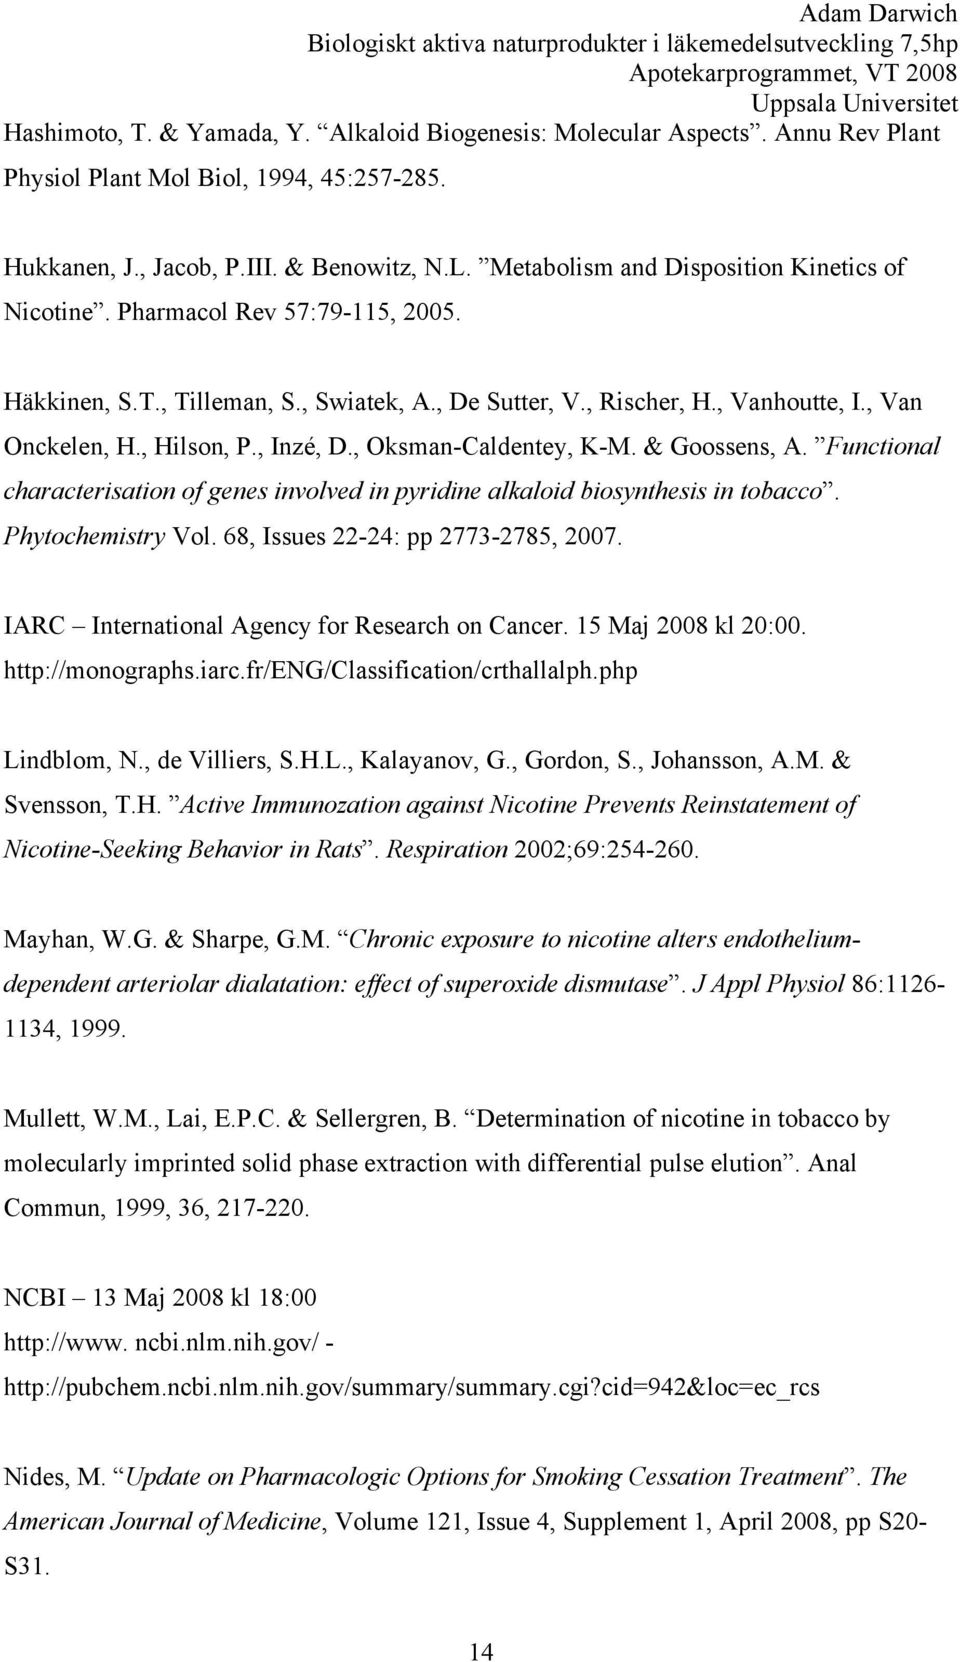 , Inzé, D., Oksman-Caldentey, K-M. & Goossens, A. Functional characterisation of genes involved in pyridine alkaloid biosynthesis in tobacco. Phytochemistry Vol. 68, Issues 22-24: pp 2773-2785, 2007.